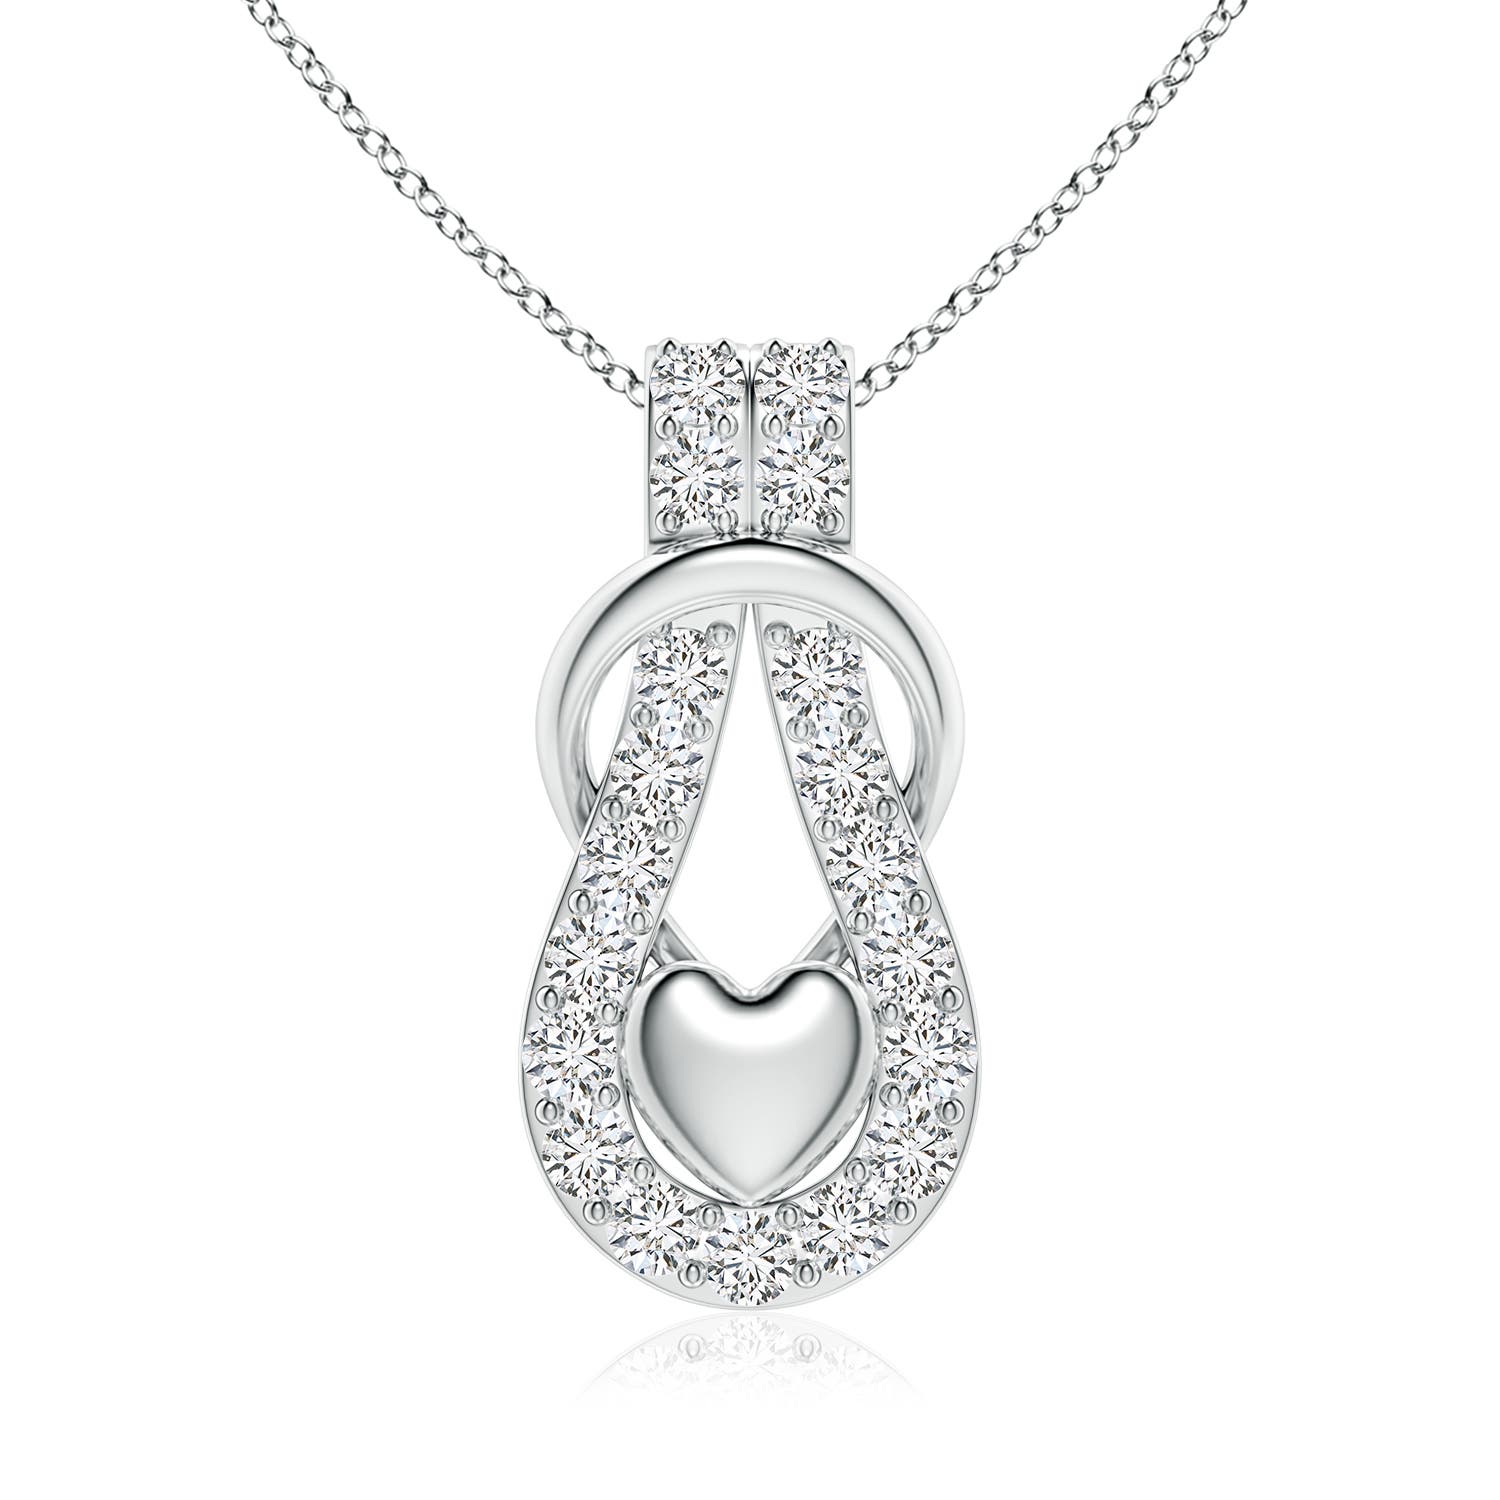 H, SI2 / 3.02 CT / 14 KT White Gold